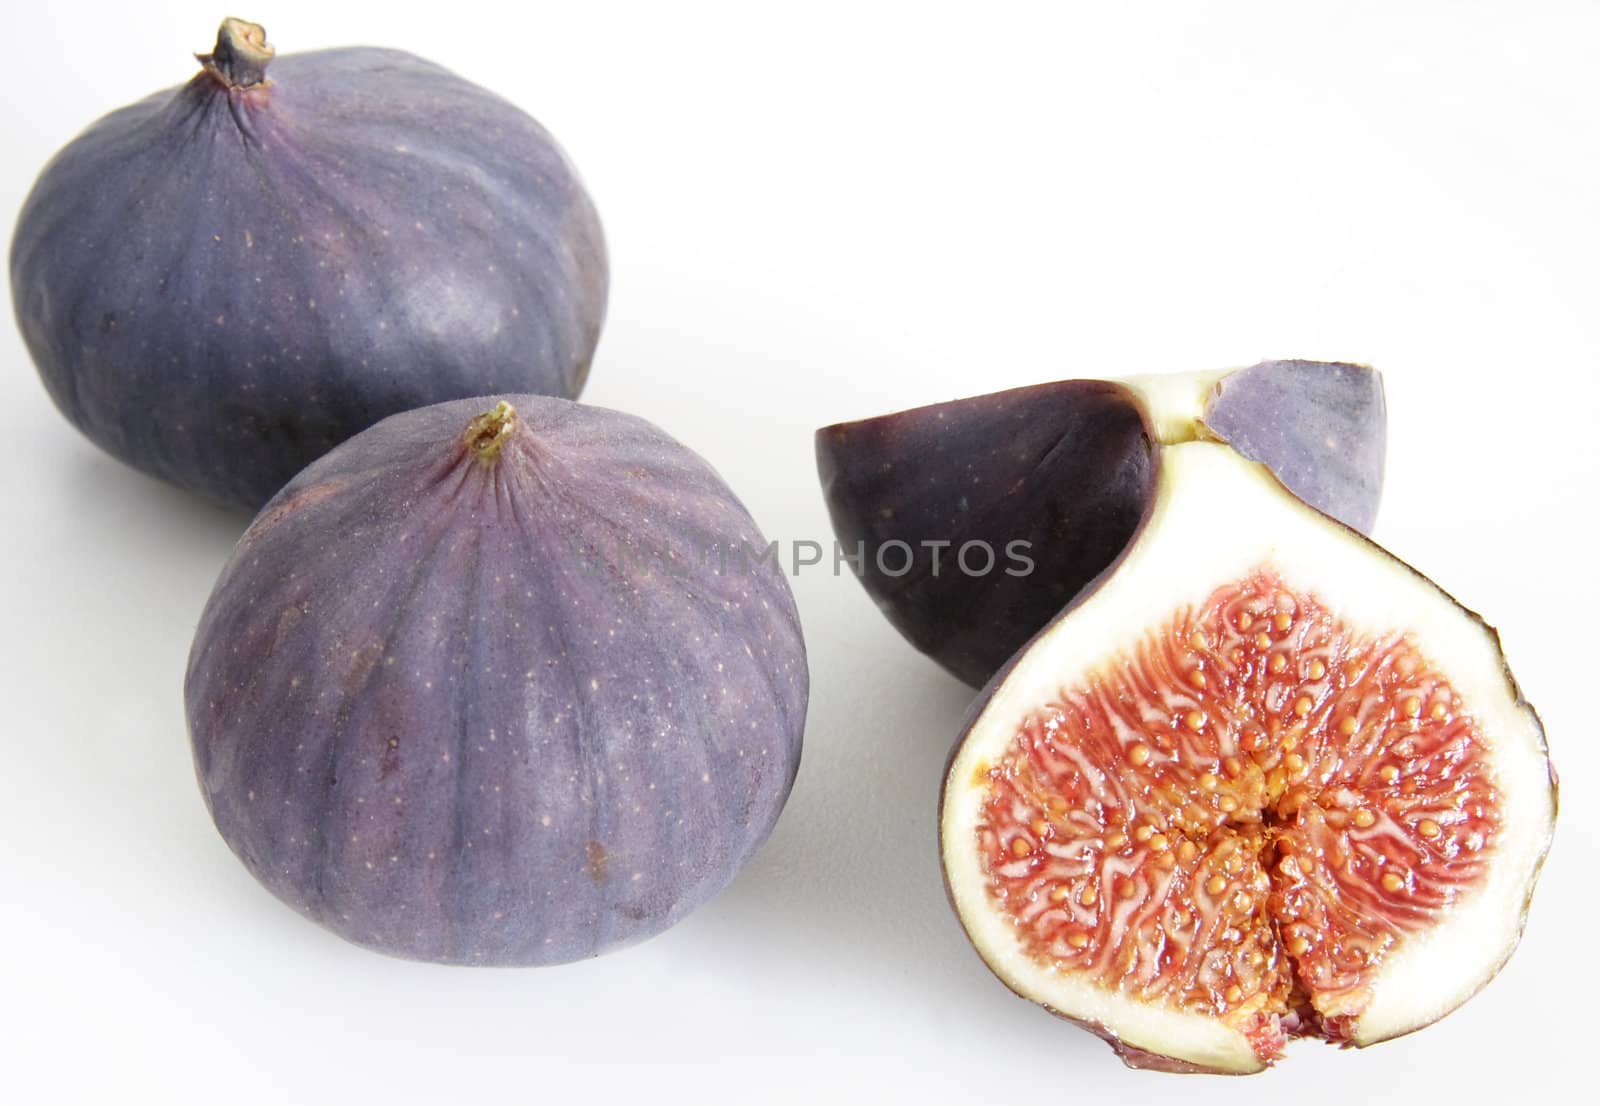 two whole figs and one cut in half